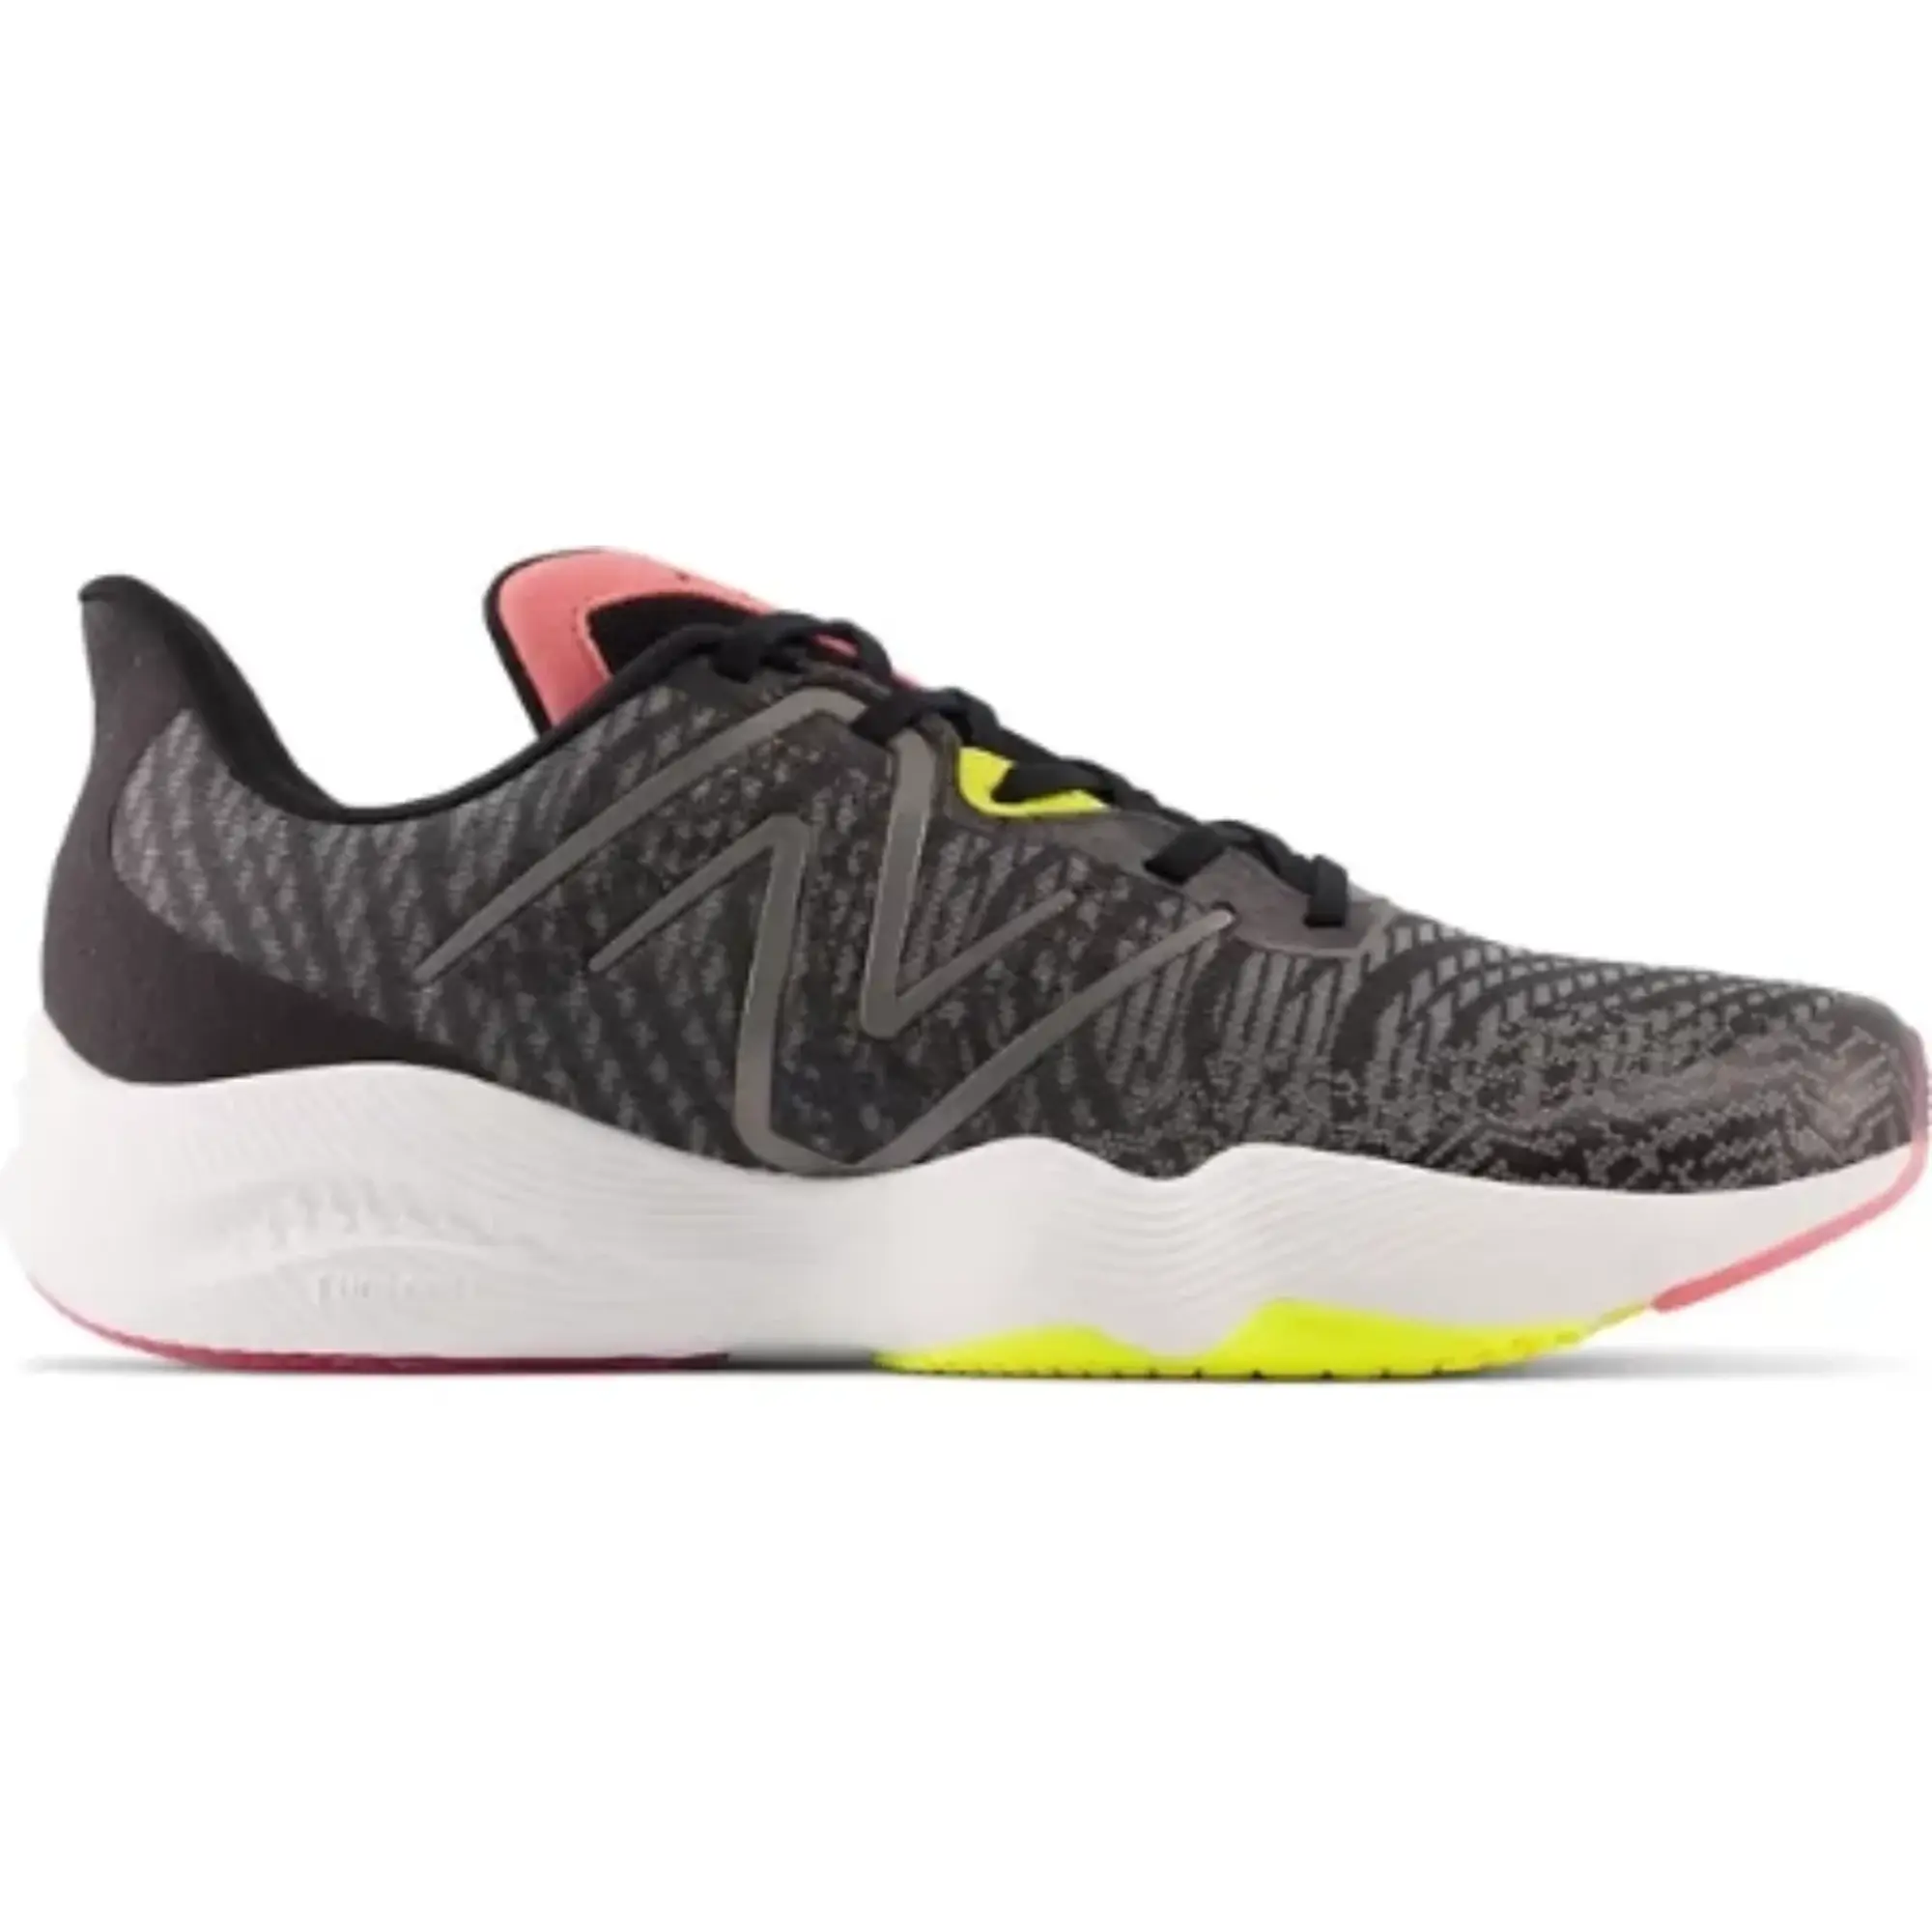 New Balance Men's FuelCell Shift TR v2 in Grey/Yellow/Orange Textile